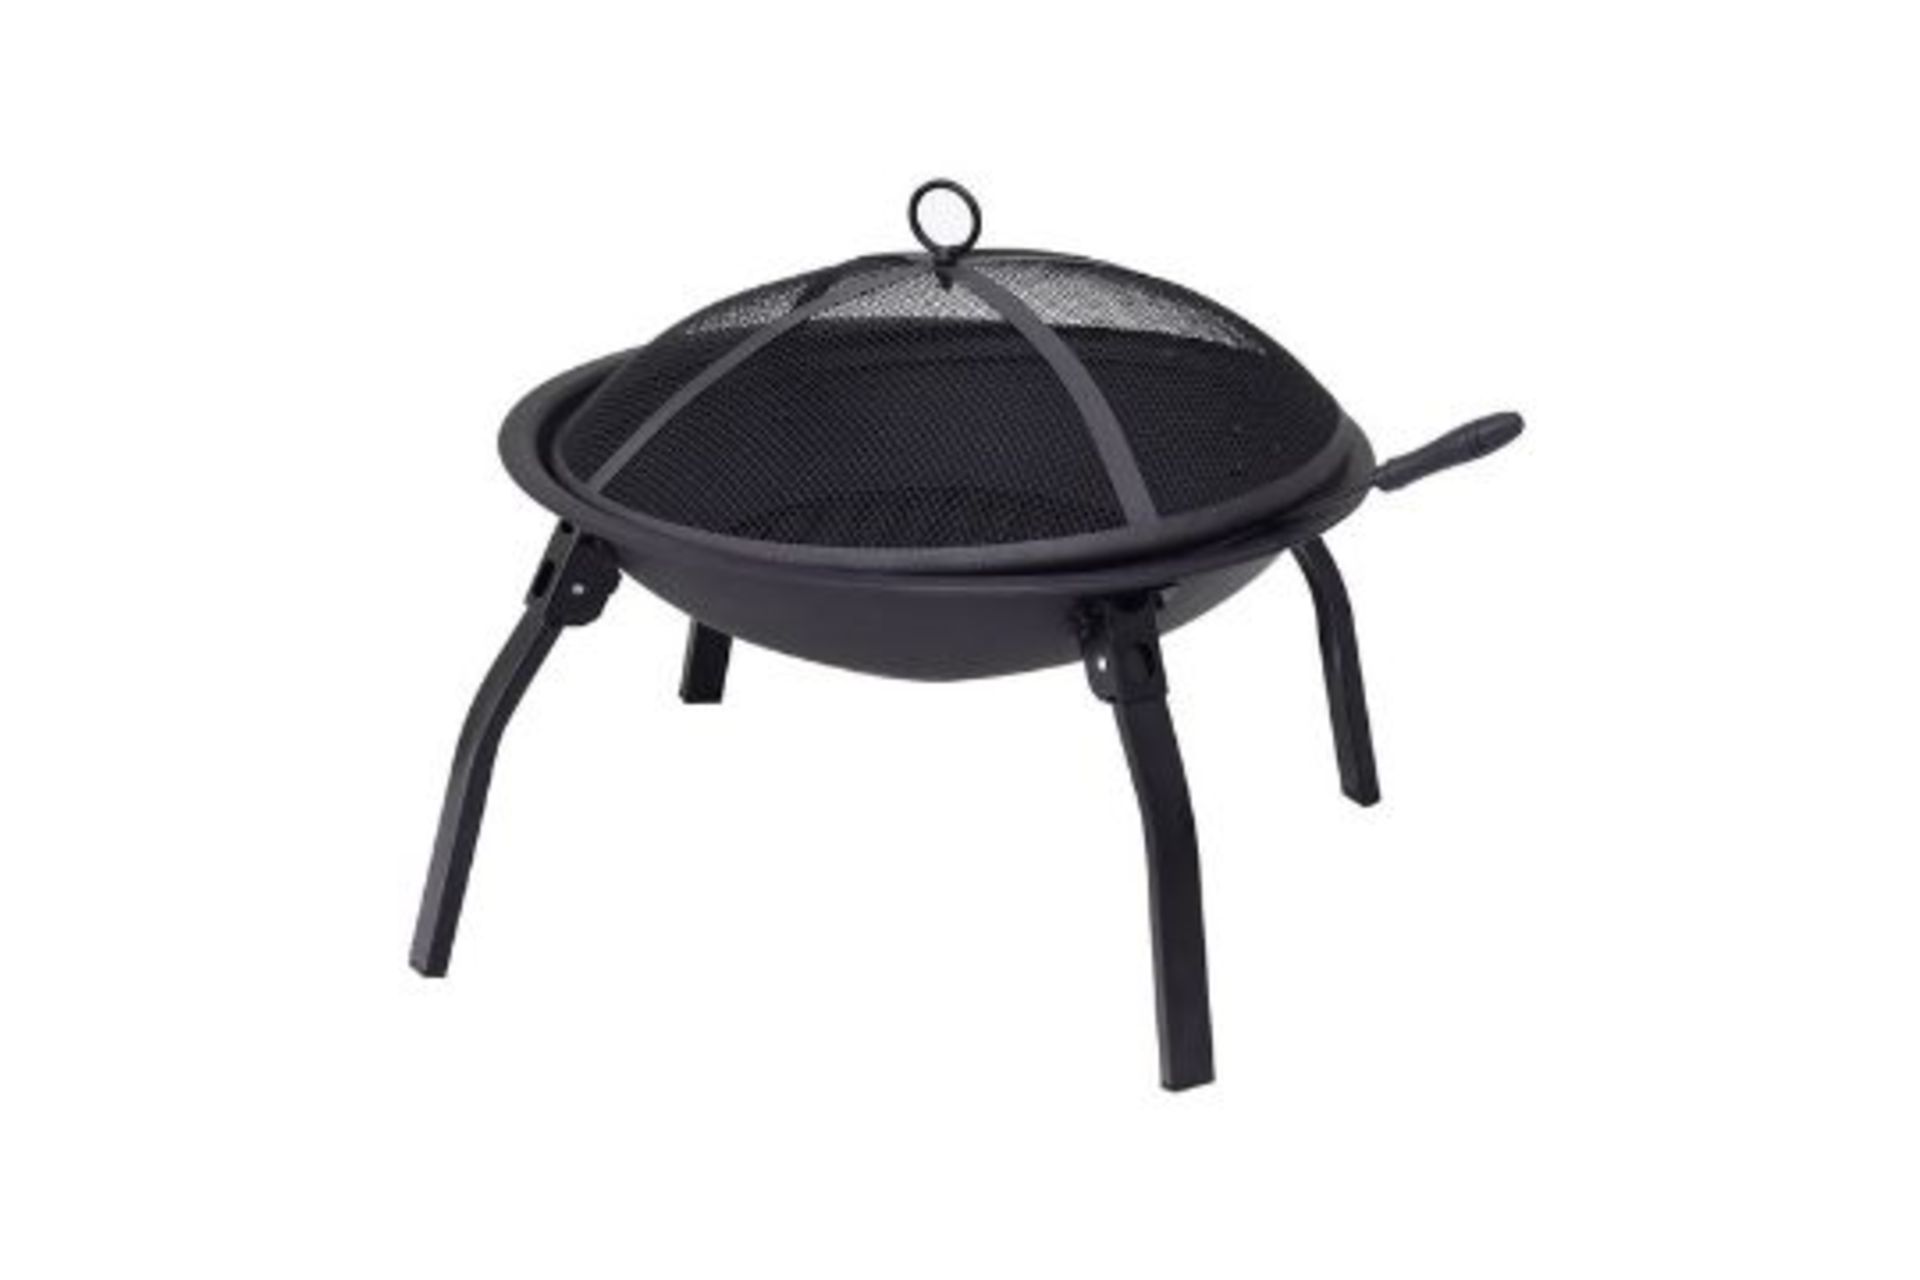 New Boxed Portable Folding Fire Pit BBQ 4 Leg Fire bowl Cooking Campfire. RRP £119.99. This - Image 3 of 3